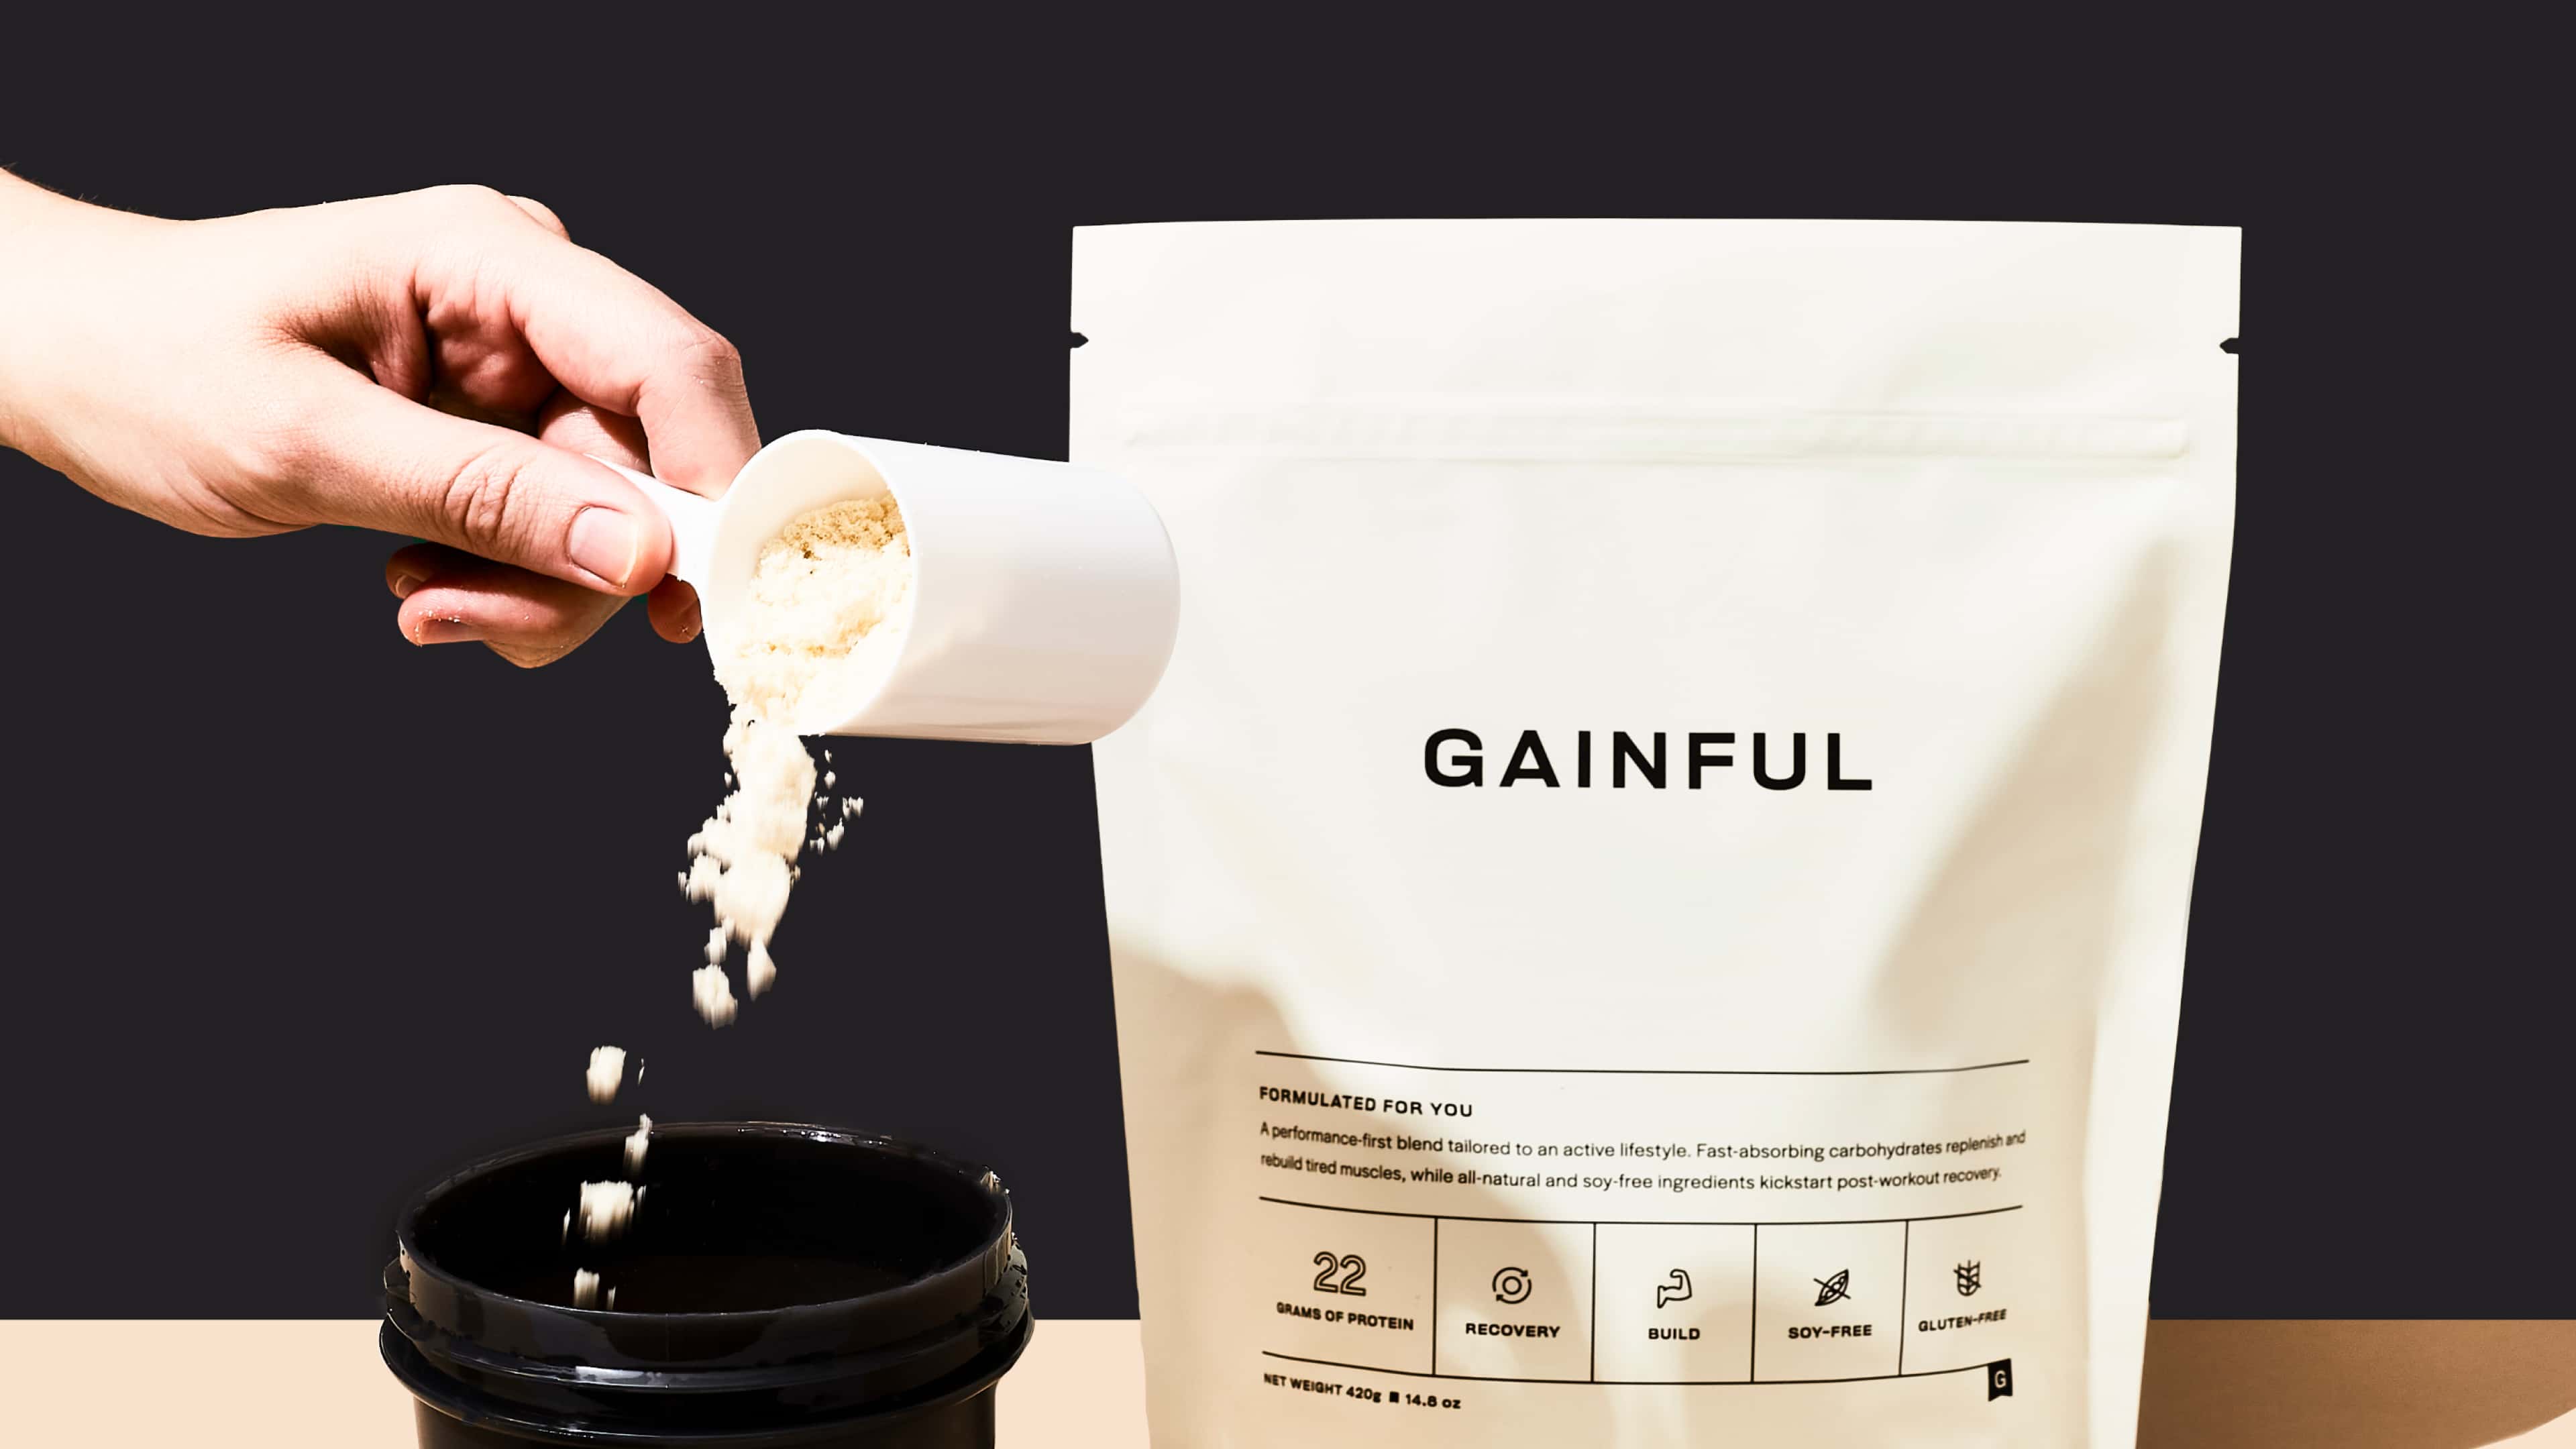 How much a of protein Gainful